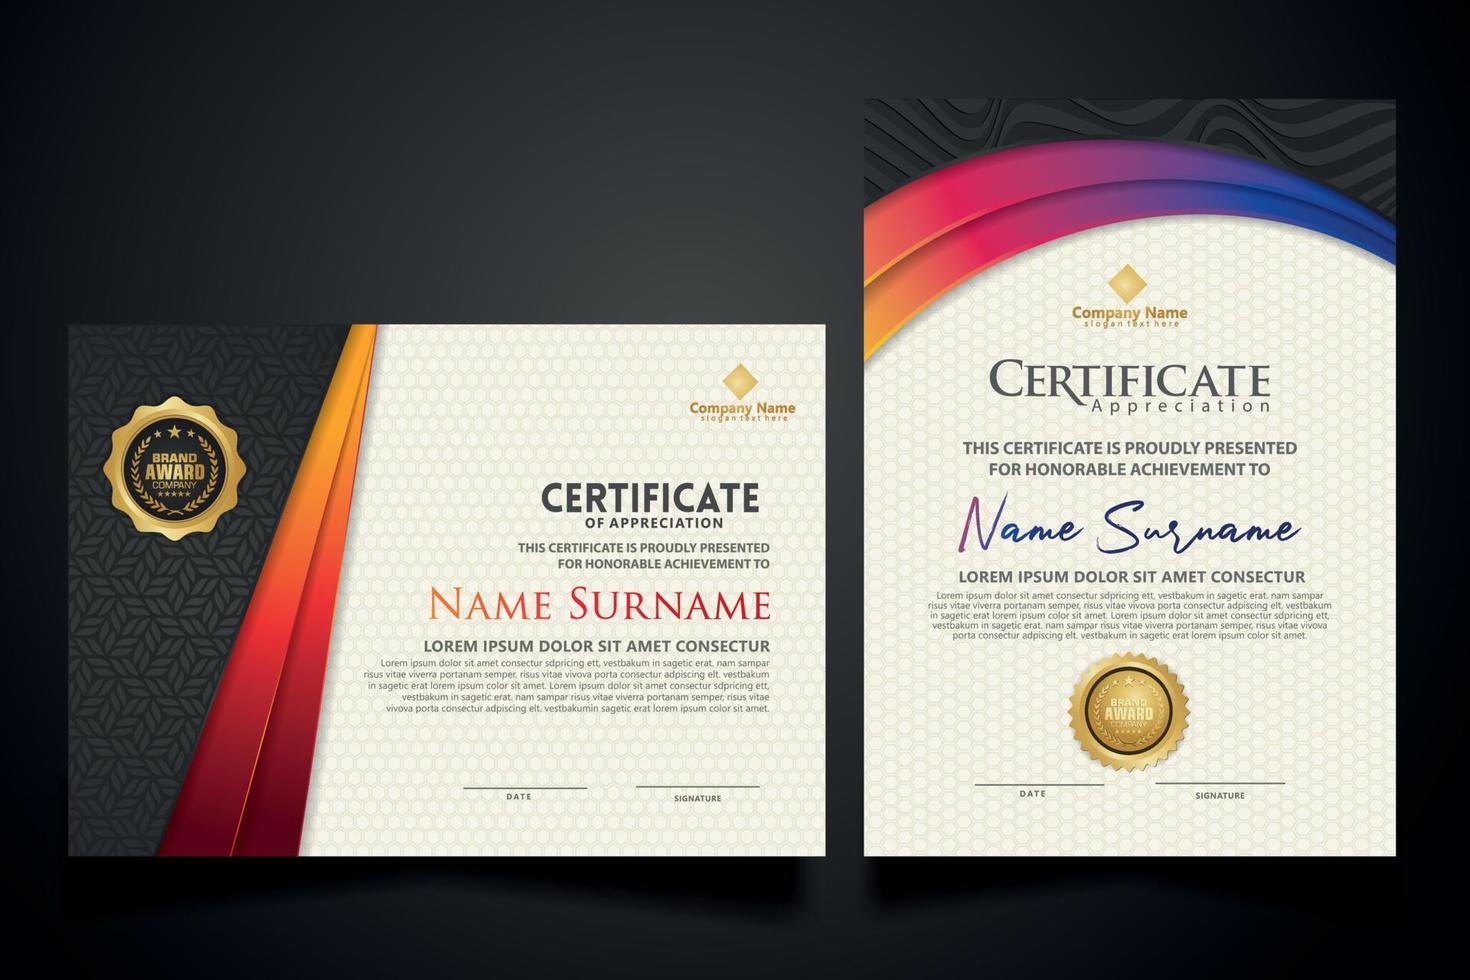 certificate template with Luxury realistic texture pattern and dynamic shapes composition gradient colors,diploma,Vector illustration vector